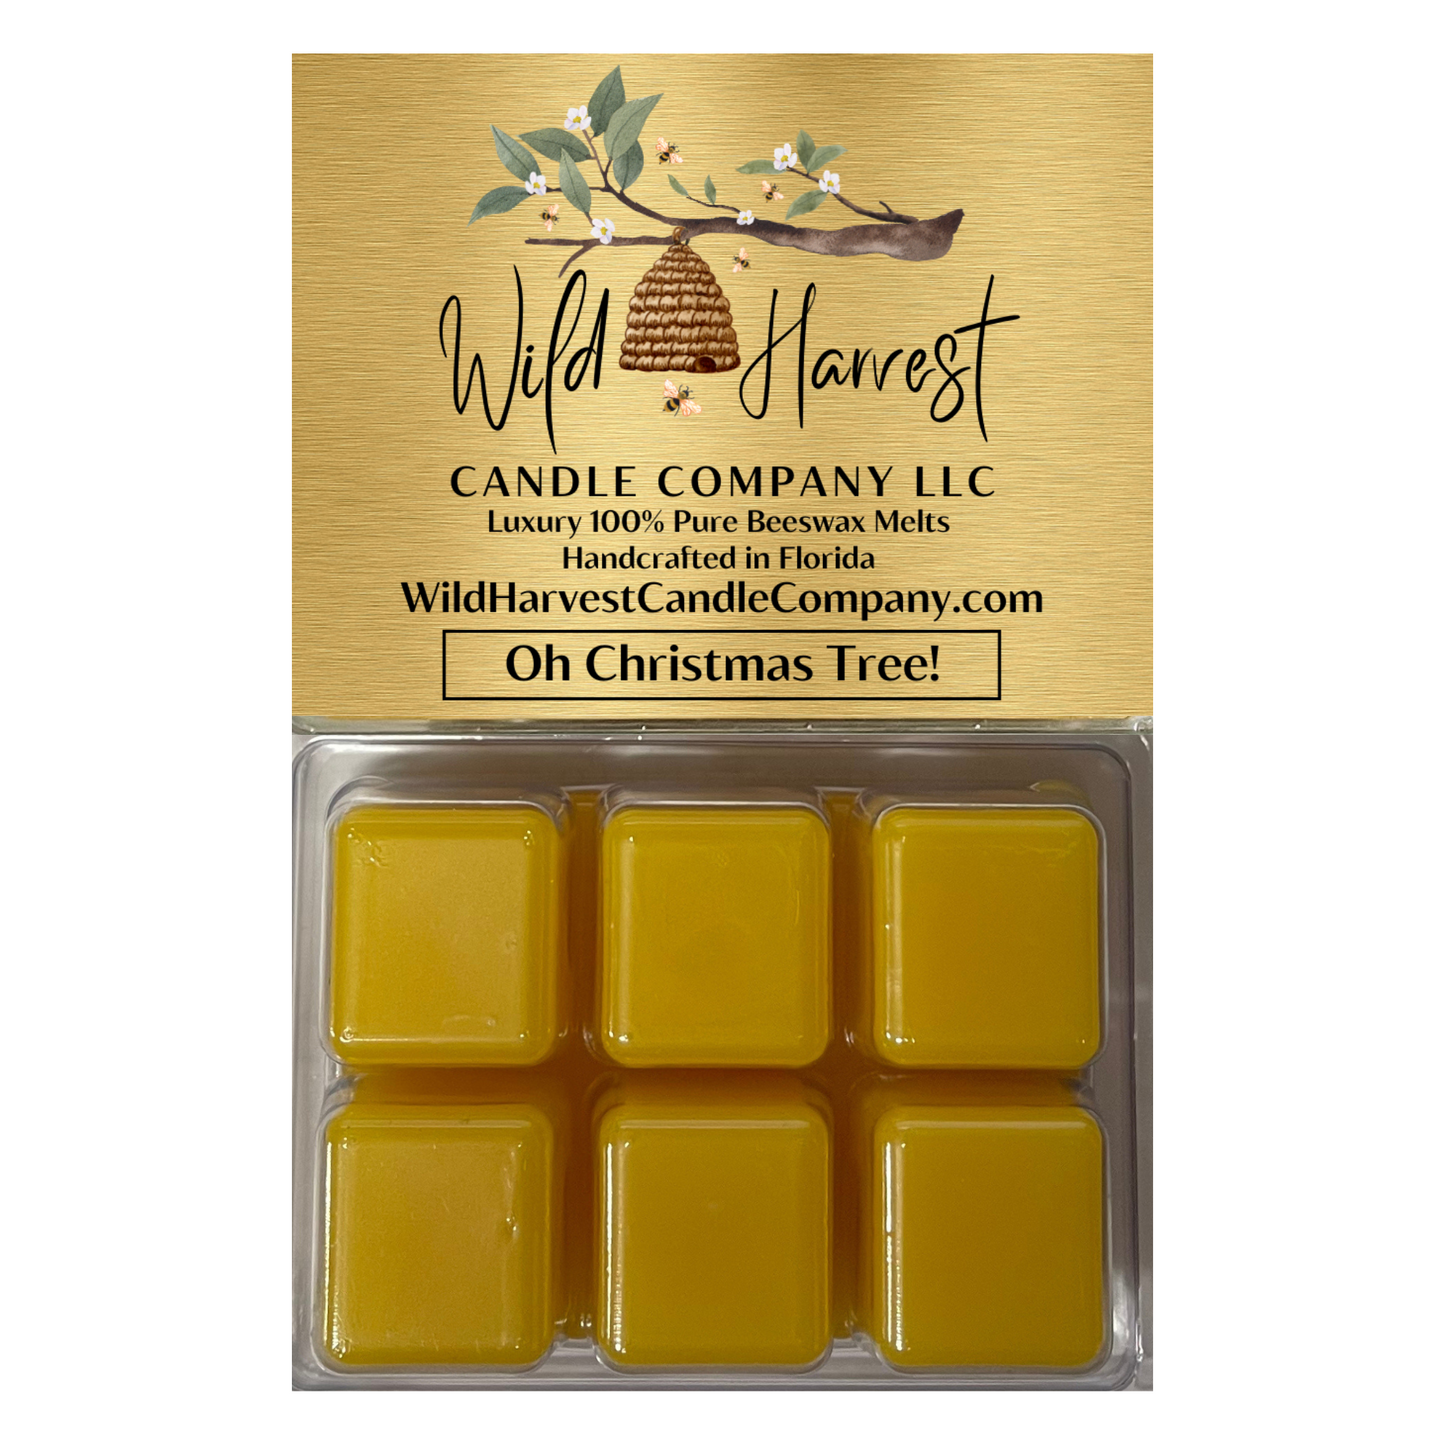 Oh Christmas Tree! Scented - Pure Beeswax Melts (1-Pack)